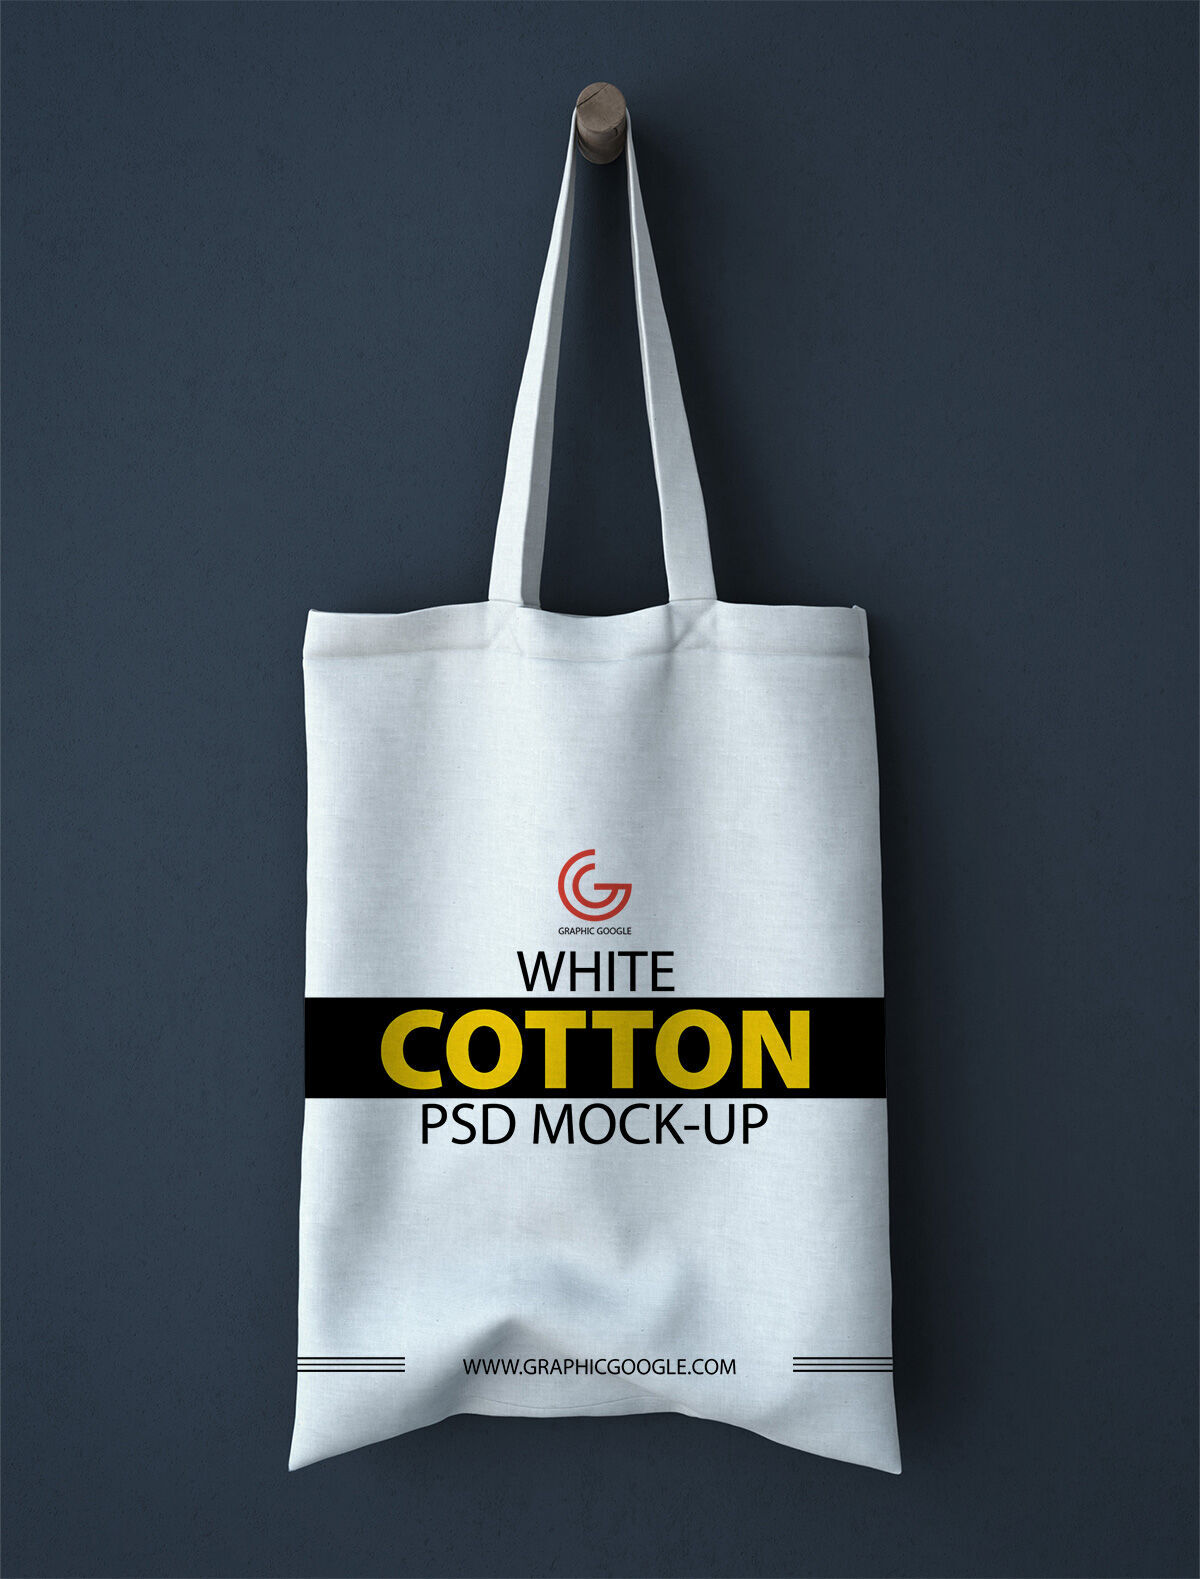 Shopping Foldable Cotton Bag Mockup Hanging on Wall Background FREE PSD